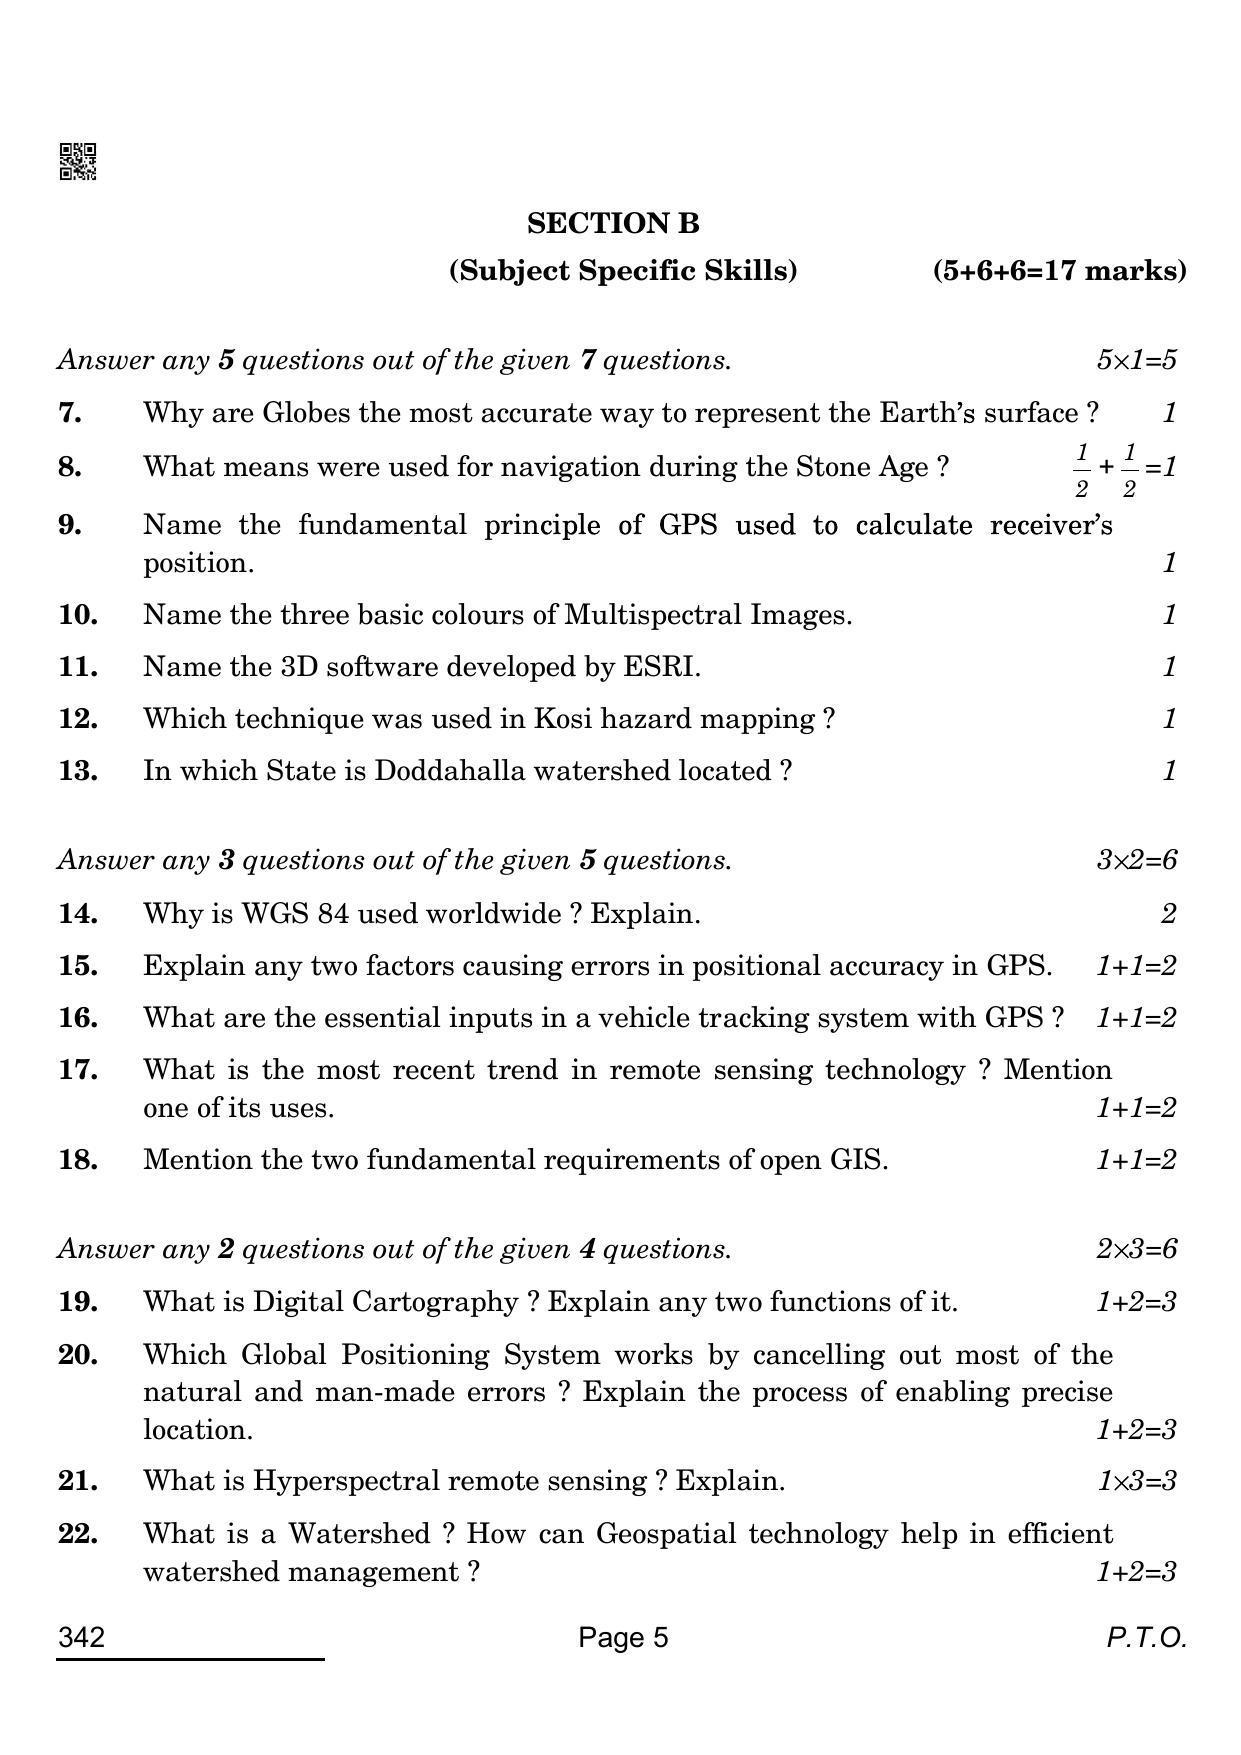 CBSE Class 12 342_Geospatial Technology 2022 Question Paper - Page 5